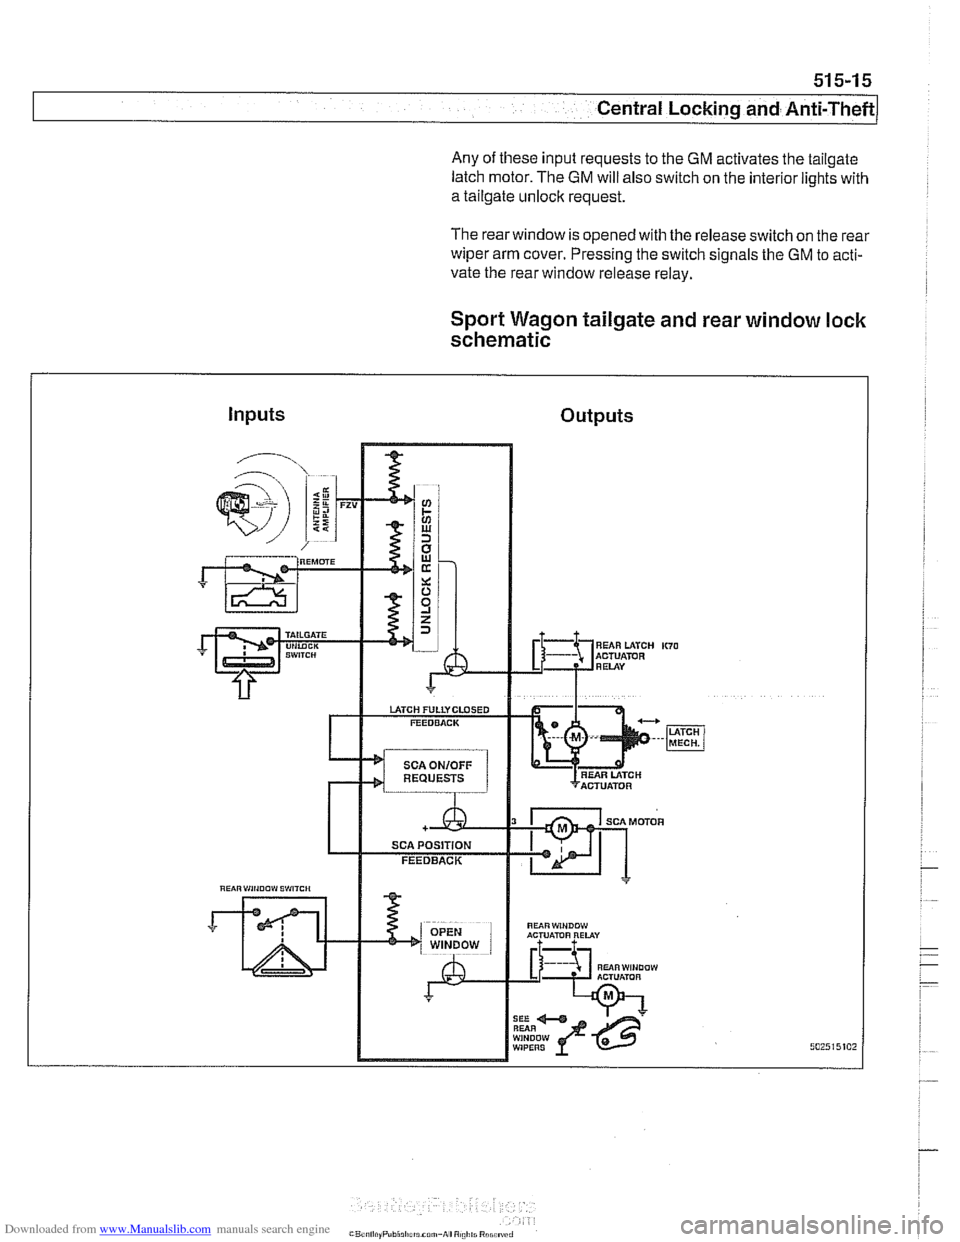 BMW 530i 2001 E39 Workshop Manual Downloaded from www.Manualslib.com manuals search engine 
51 5-1 5 
Central Locking and Anti-Theft 
Any  of these input requests to  the GM activates  the tailgate 
latch motor.  The 
GM will also swi